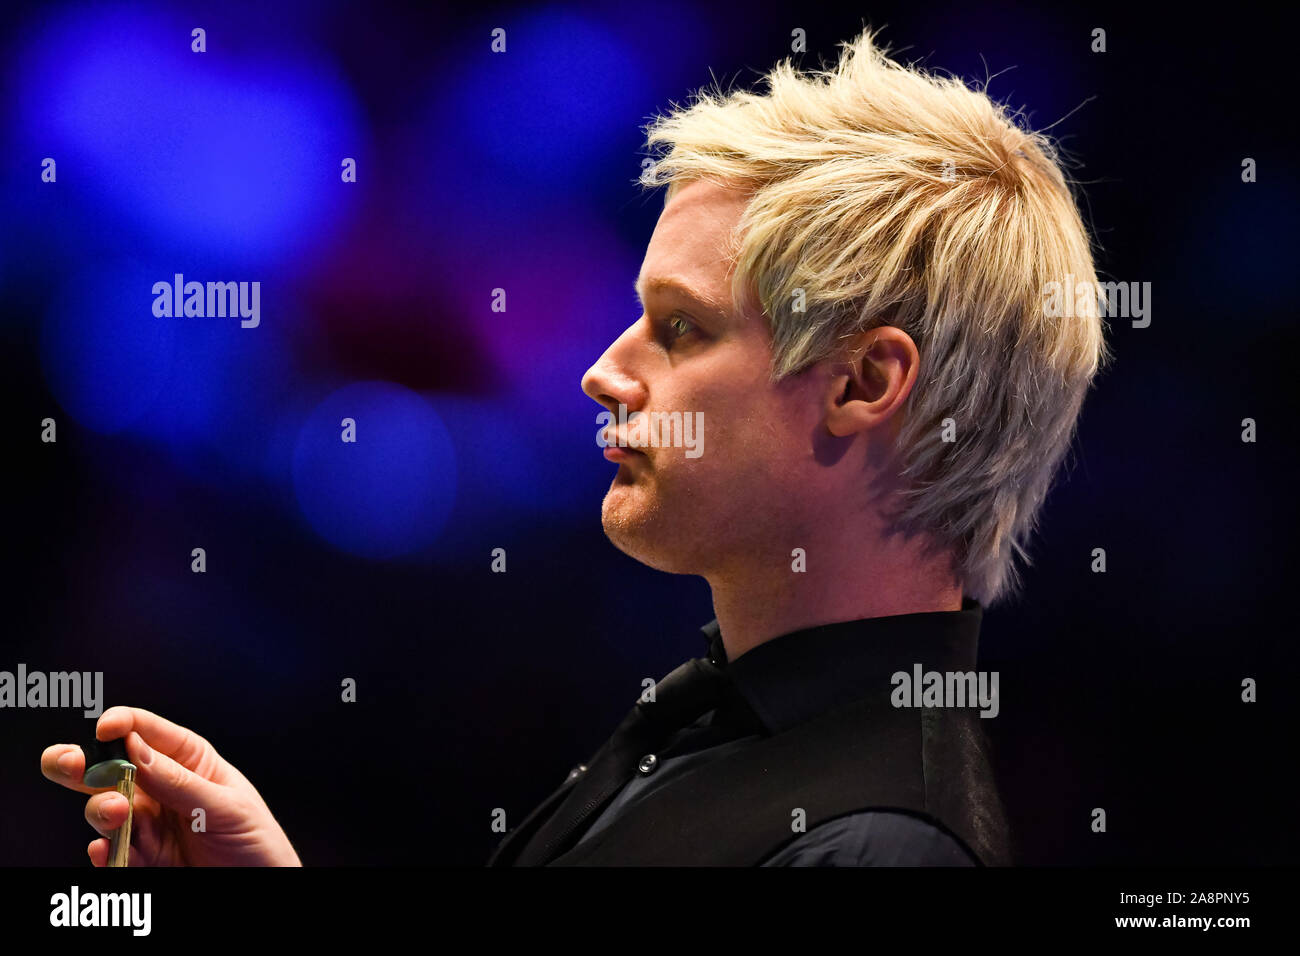 Coventry, UK. 10th Nov, 2019. Judd Trump vs Neil Robertson during Final of 2019 ManBetx Champion of Champions at Ricoh Arena on Sunday, November 10, 2019 in COVENTRY ENGLAND. Credit: Taka G Wu/Alamy Live News Stock Photo